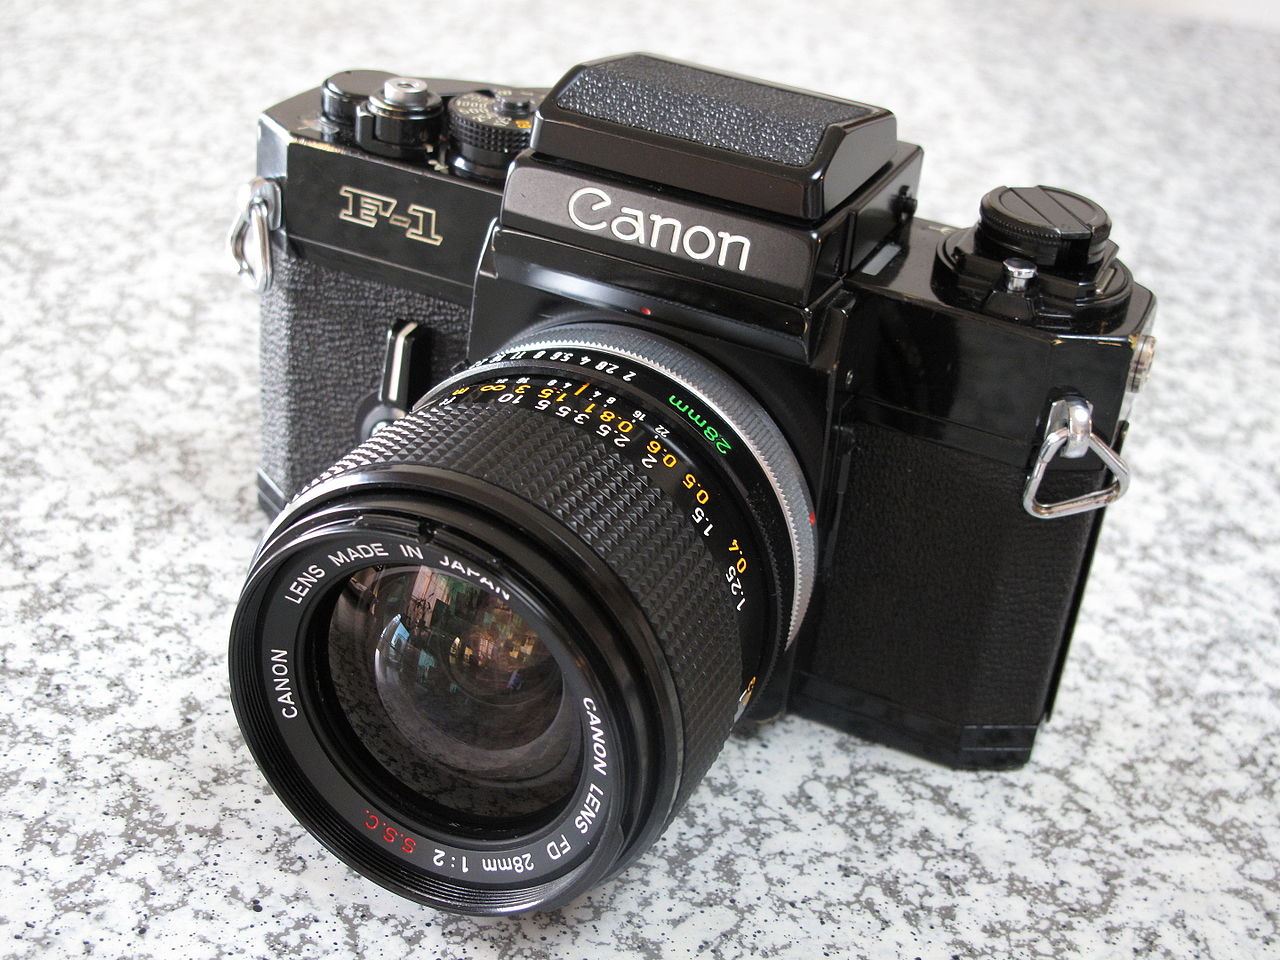 File:Canon F-1 with Waist Level Finder (4314993245).jpg 